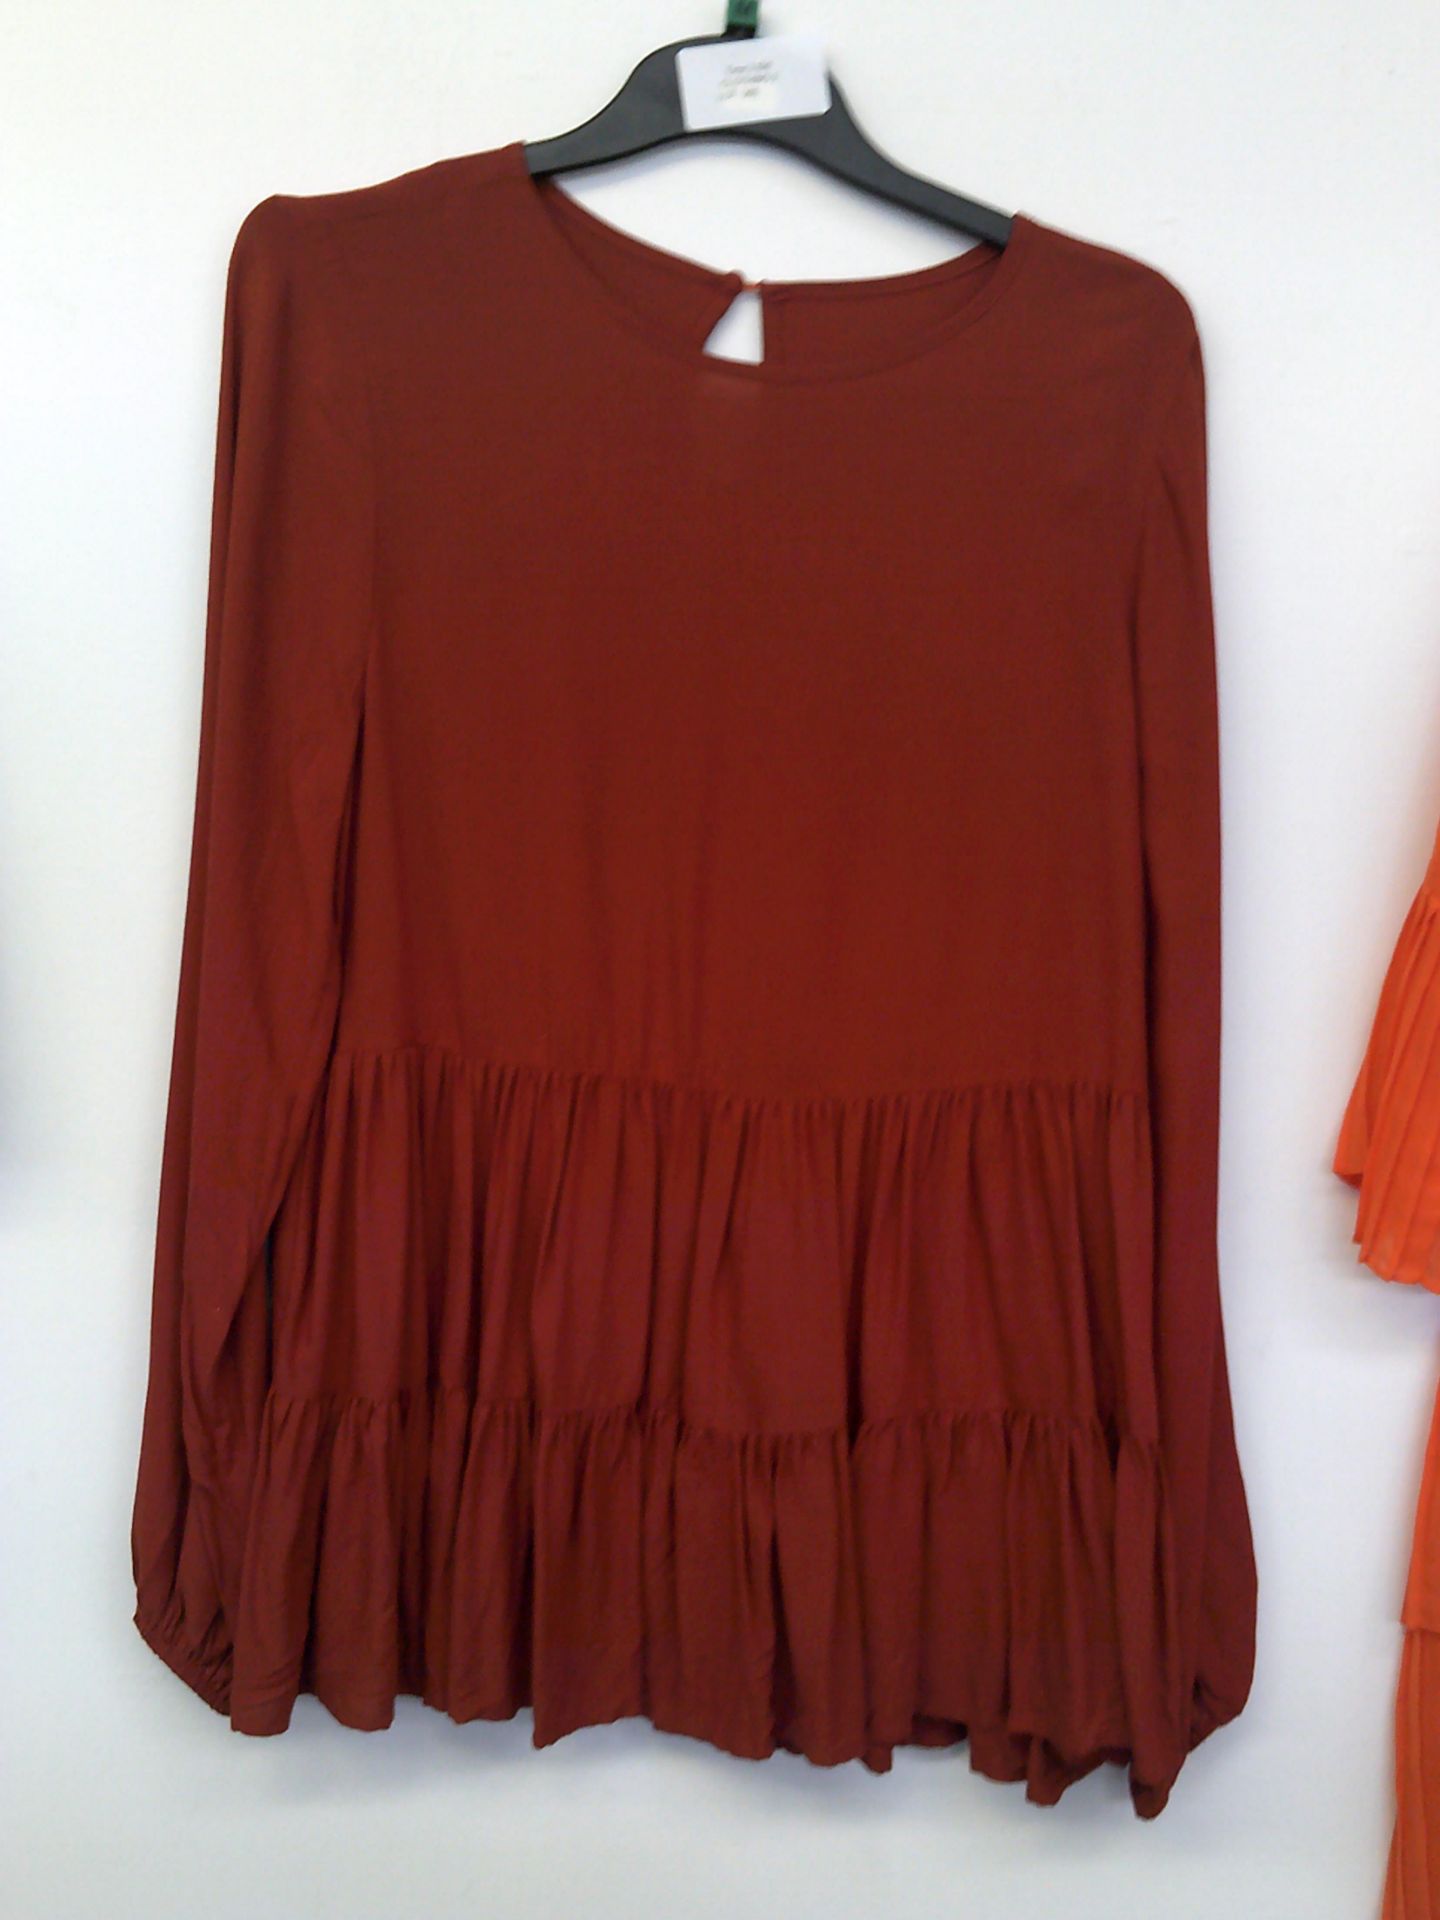 MARKS AND SPENCERS RUST BLOUSE SIZE MEDIUM